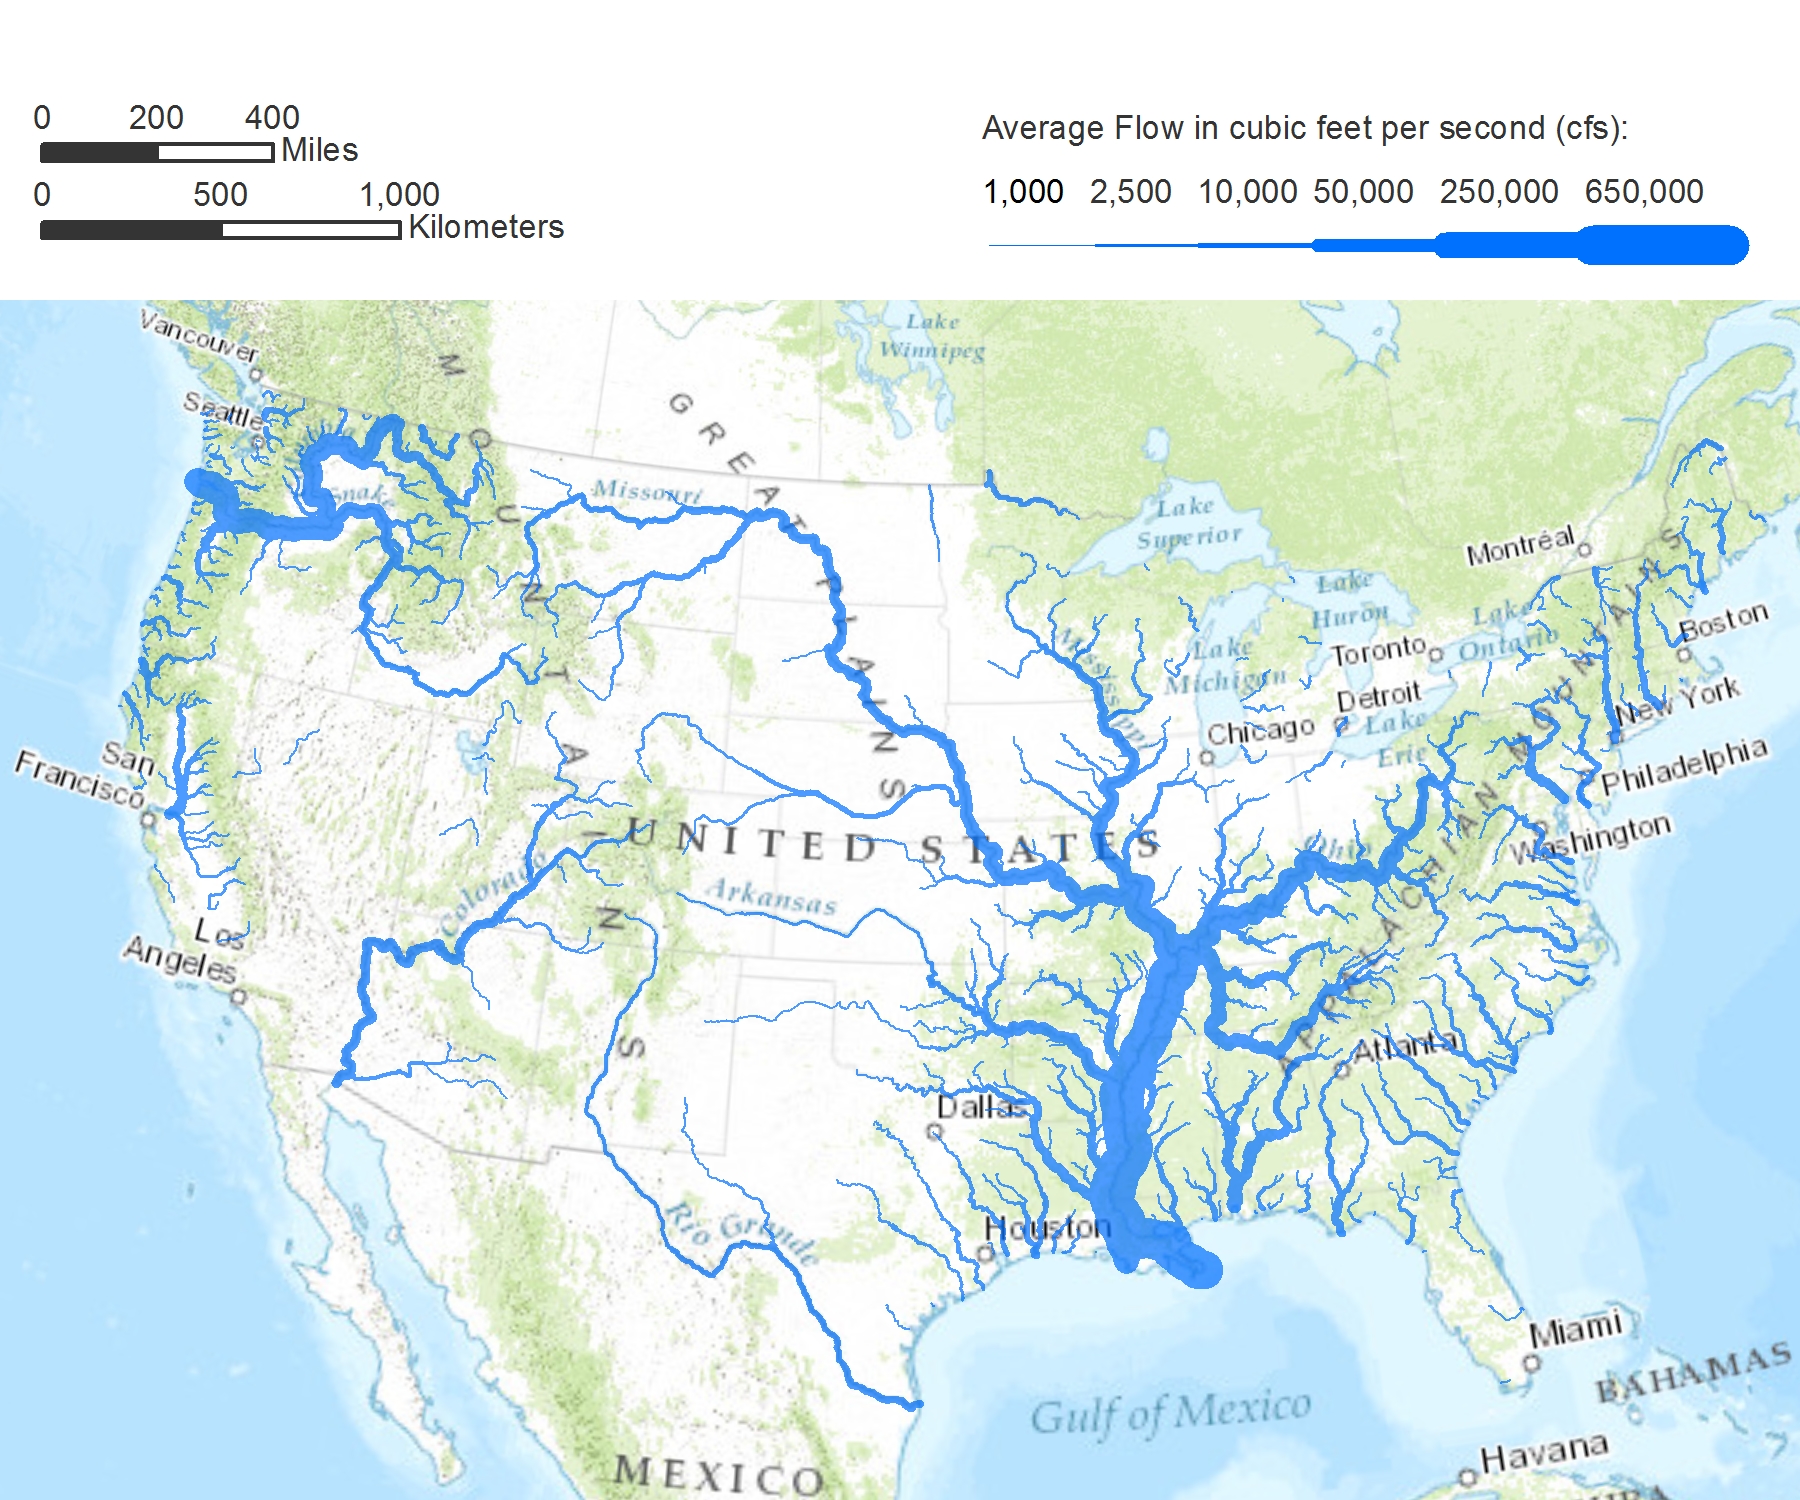 America’s Rivers: A New Way of Seeing the Nation's Waters | ScienceBlogs